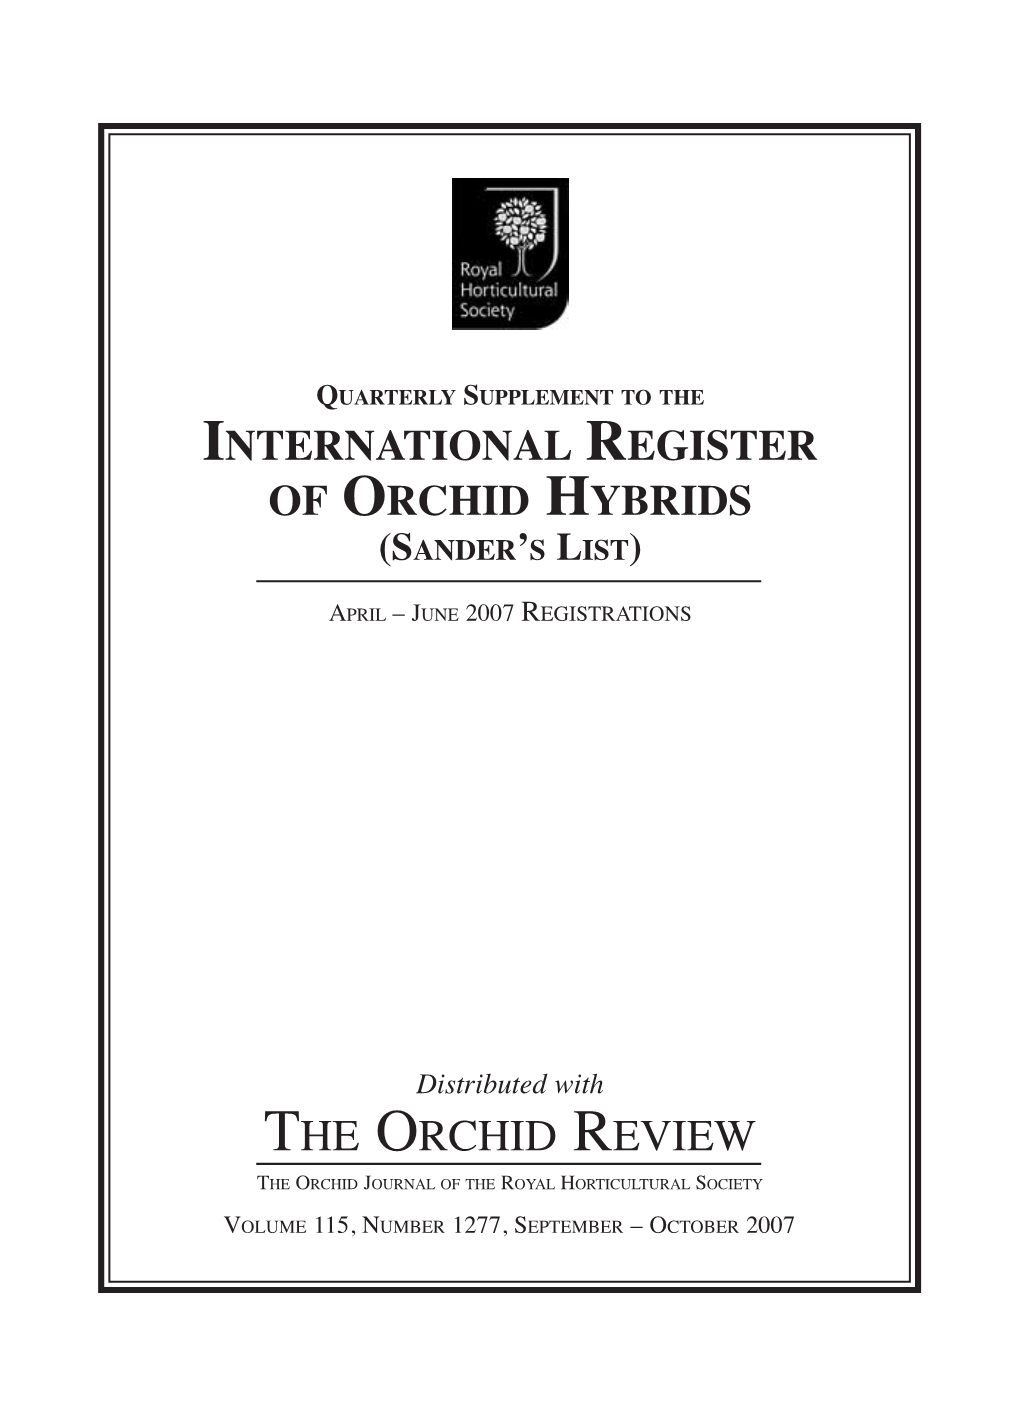 The Orchid Review the Orchid Journal of the Royal Horticultural Society